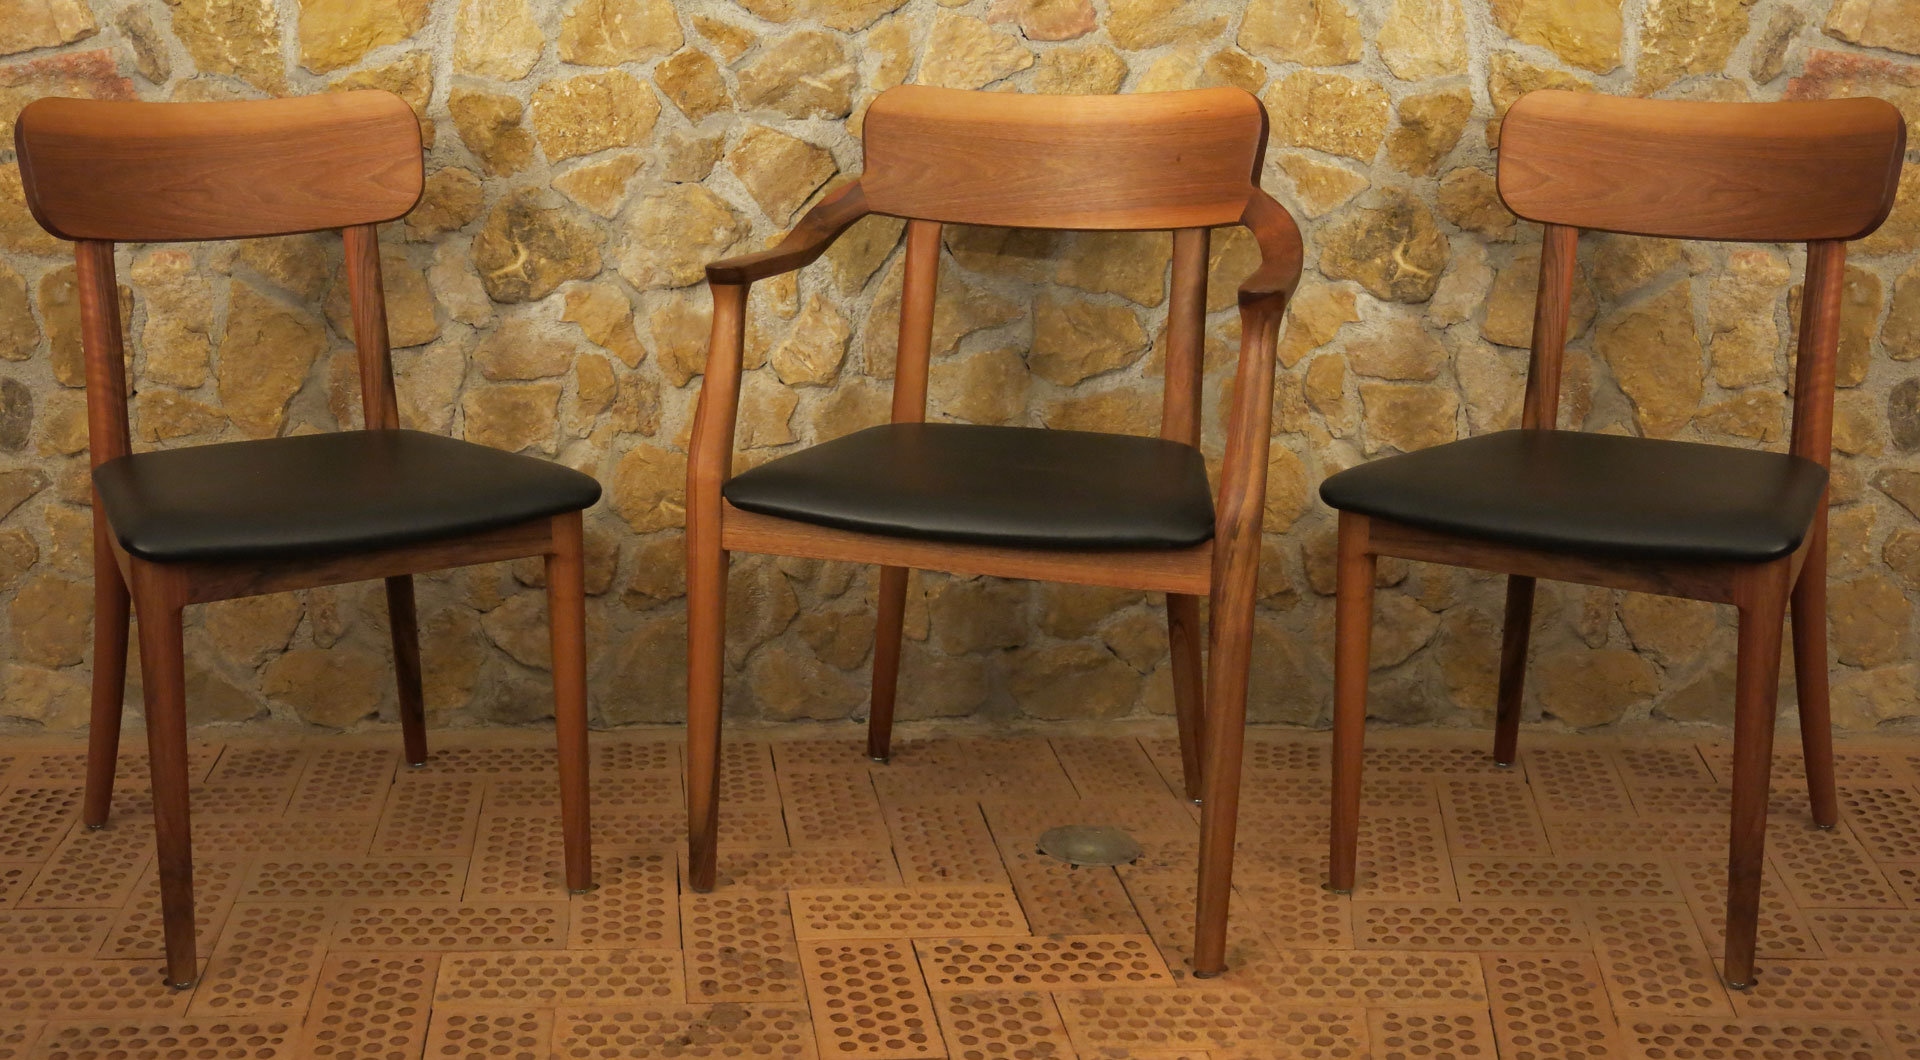 Solid wood chairs, also with armrest and leather pads by Kaltenrieder Jean-Marc, Switzerland